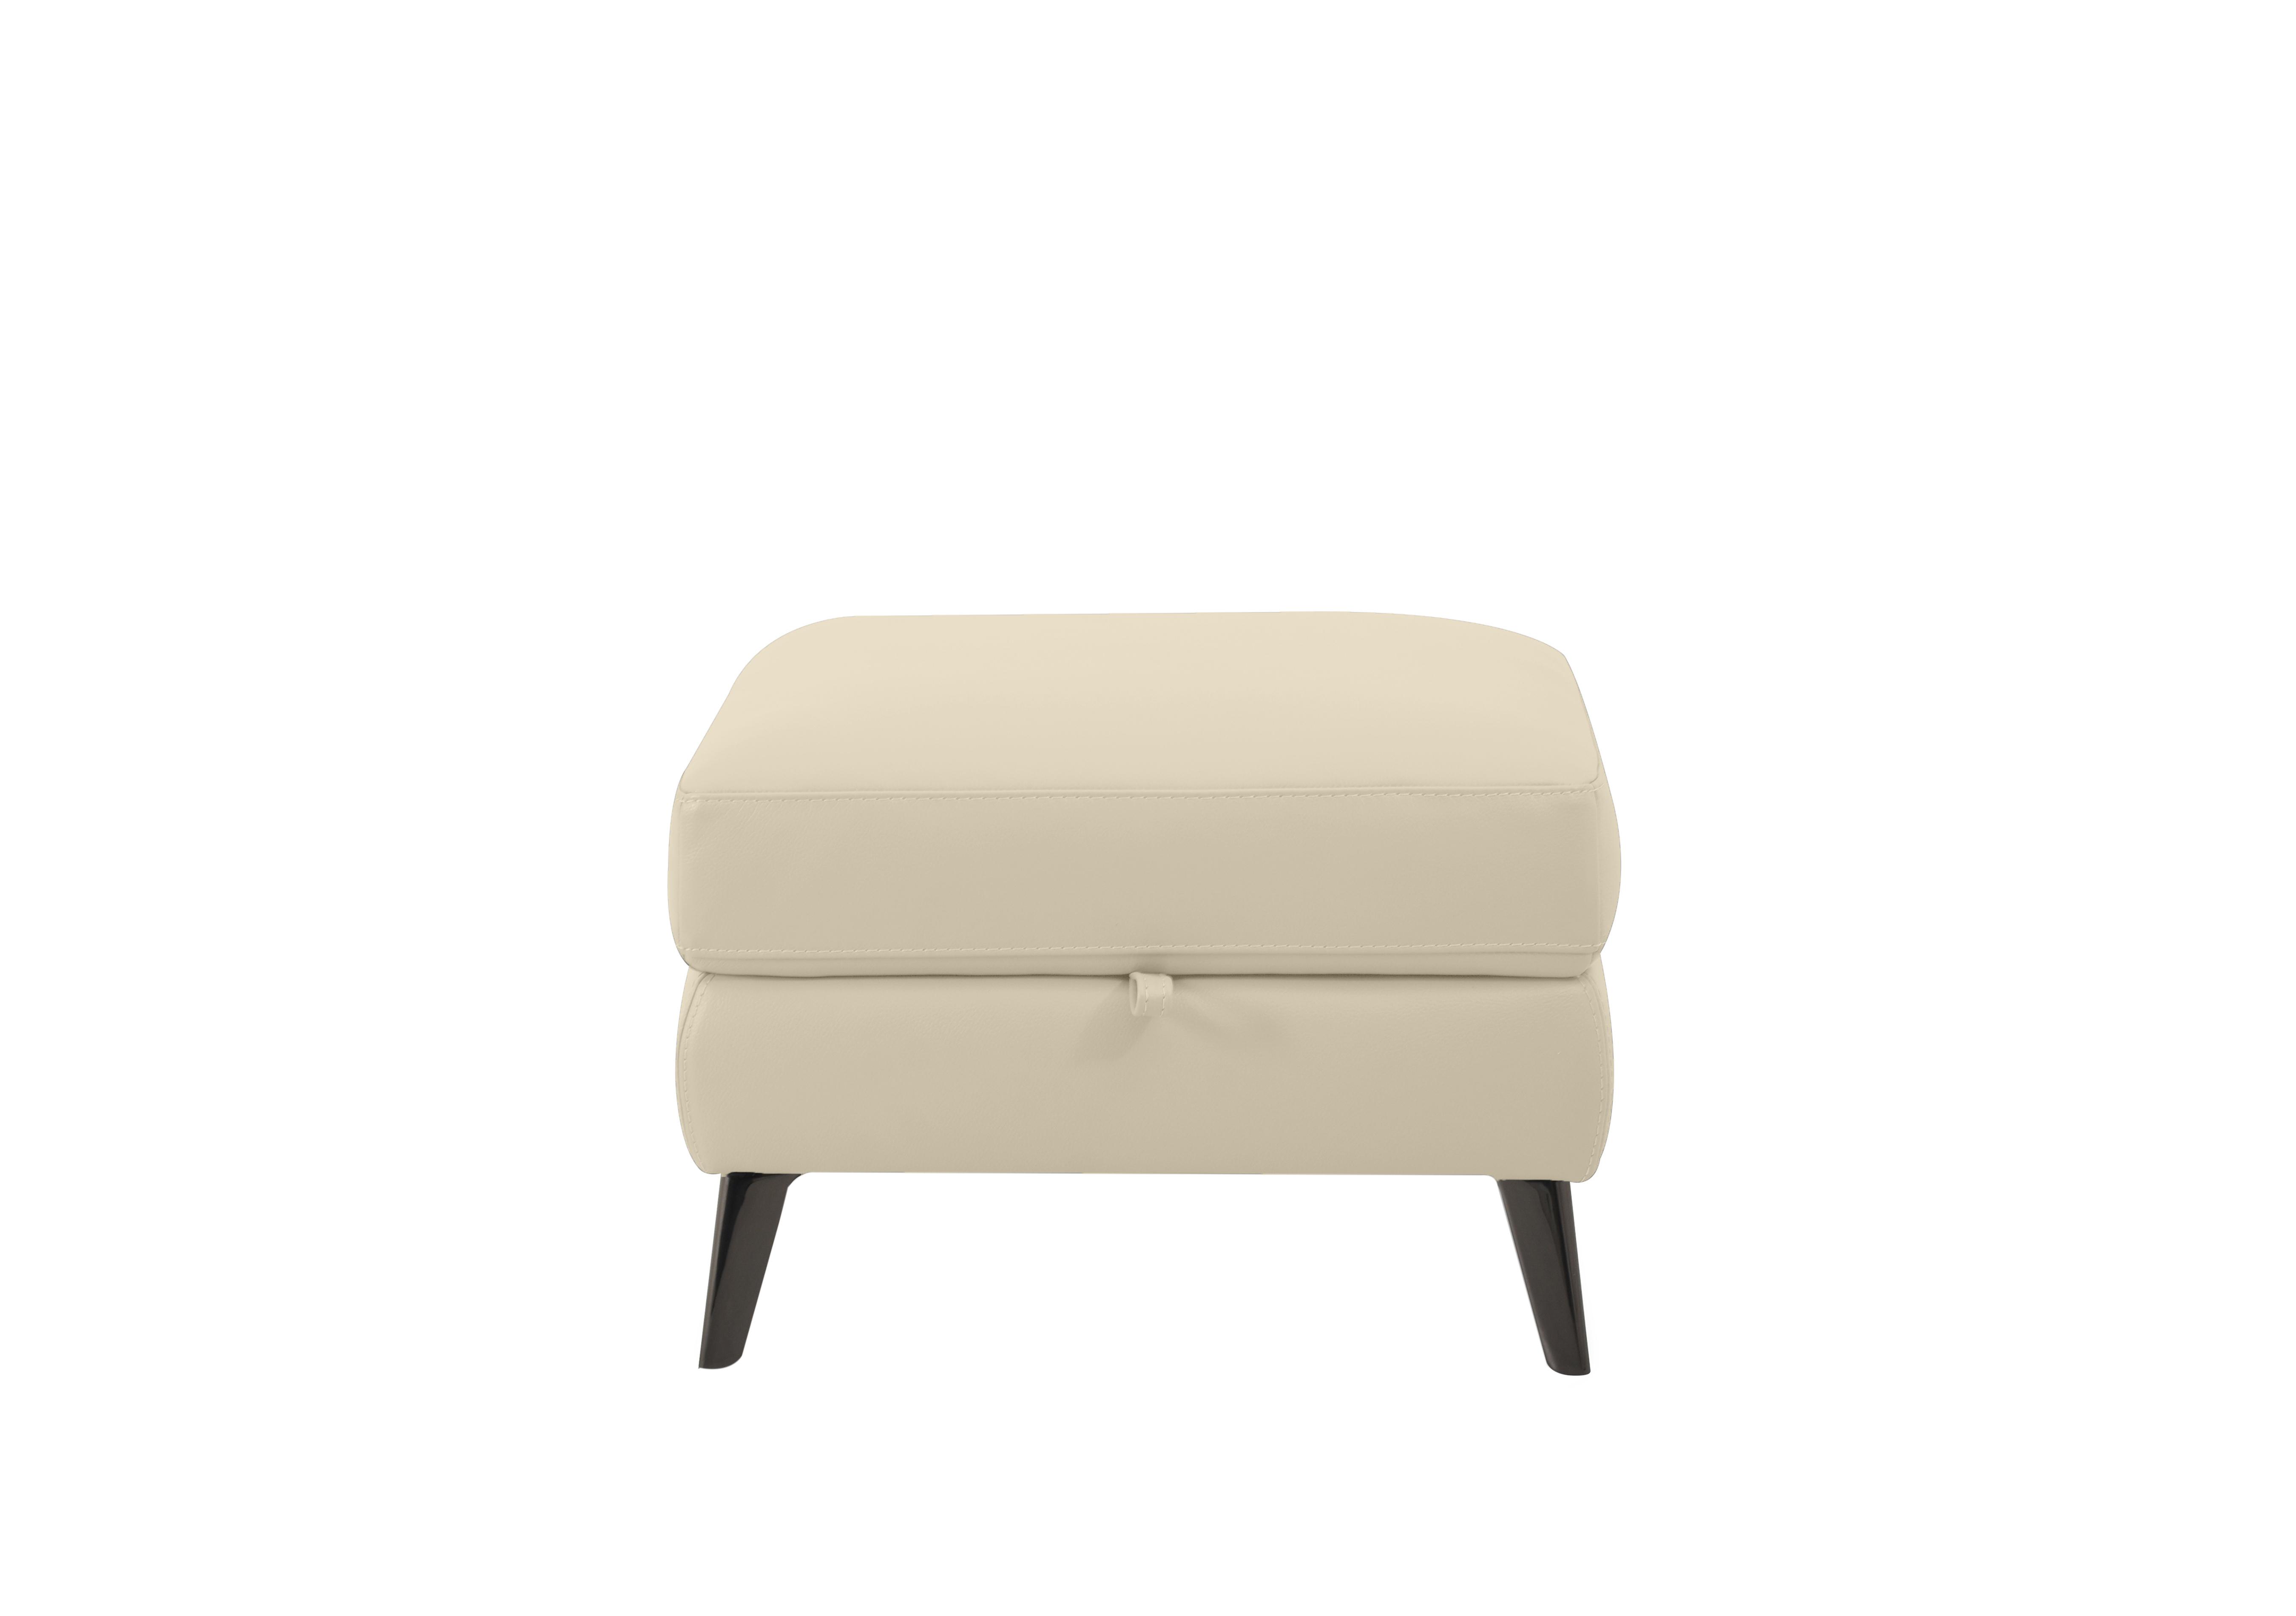 Axel Leather Storage Footstool in Bv-862c Bisque on Furniture Village